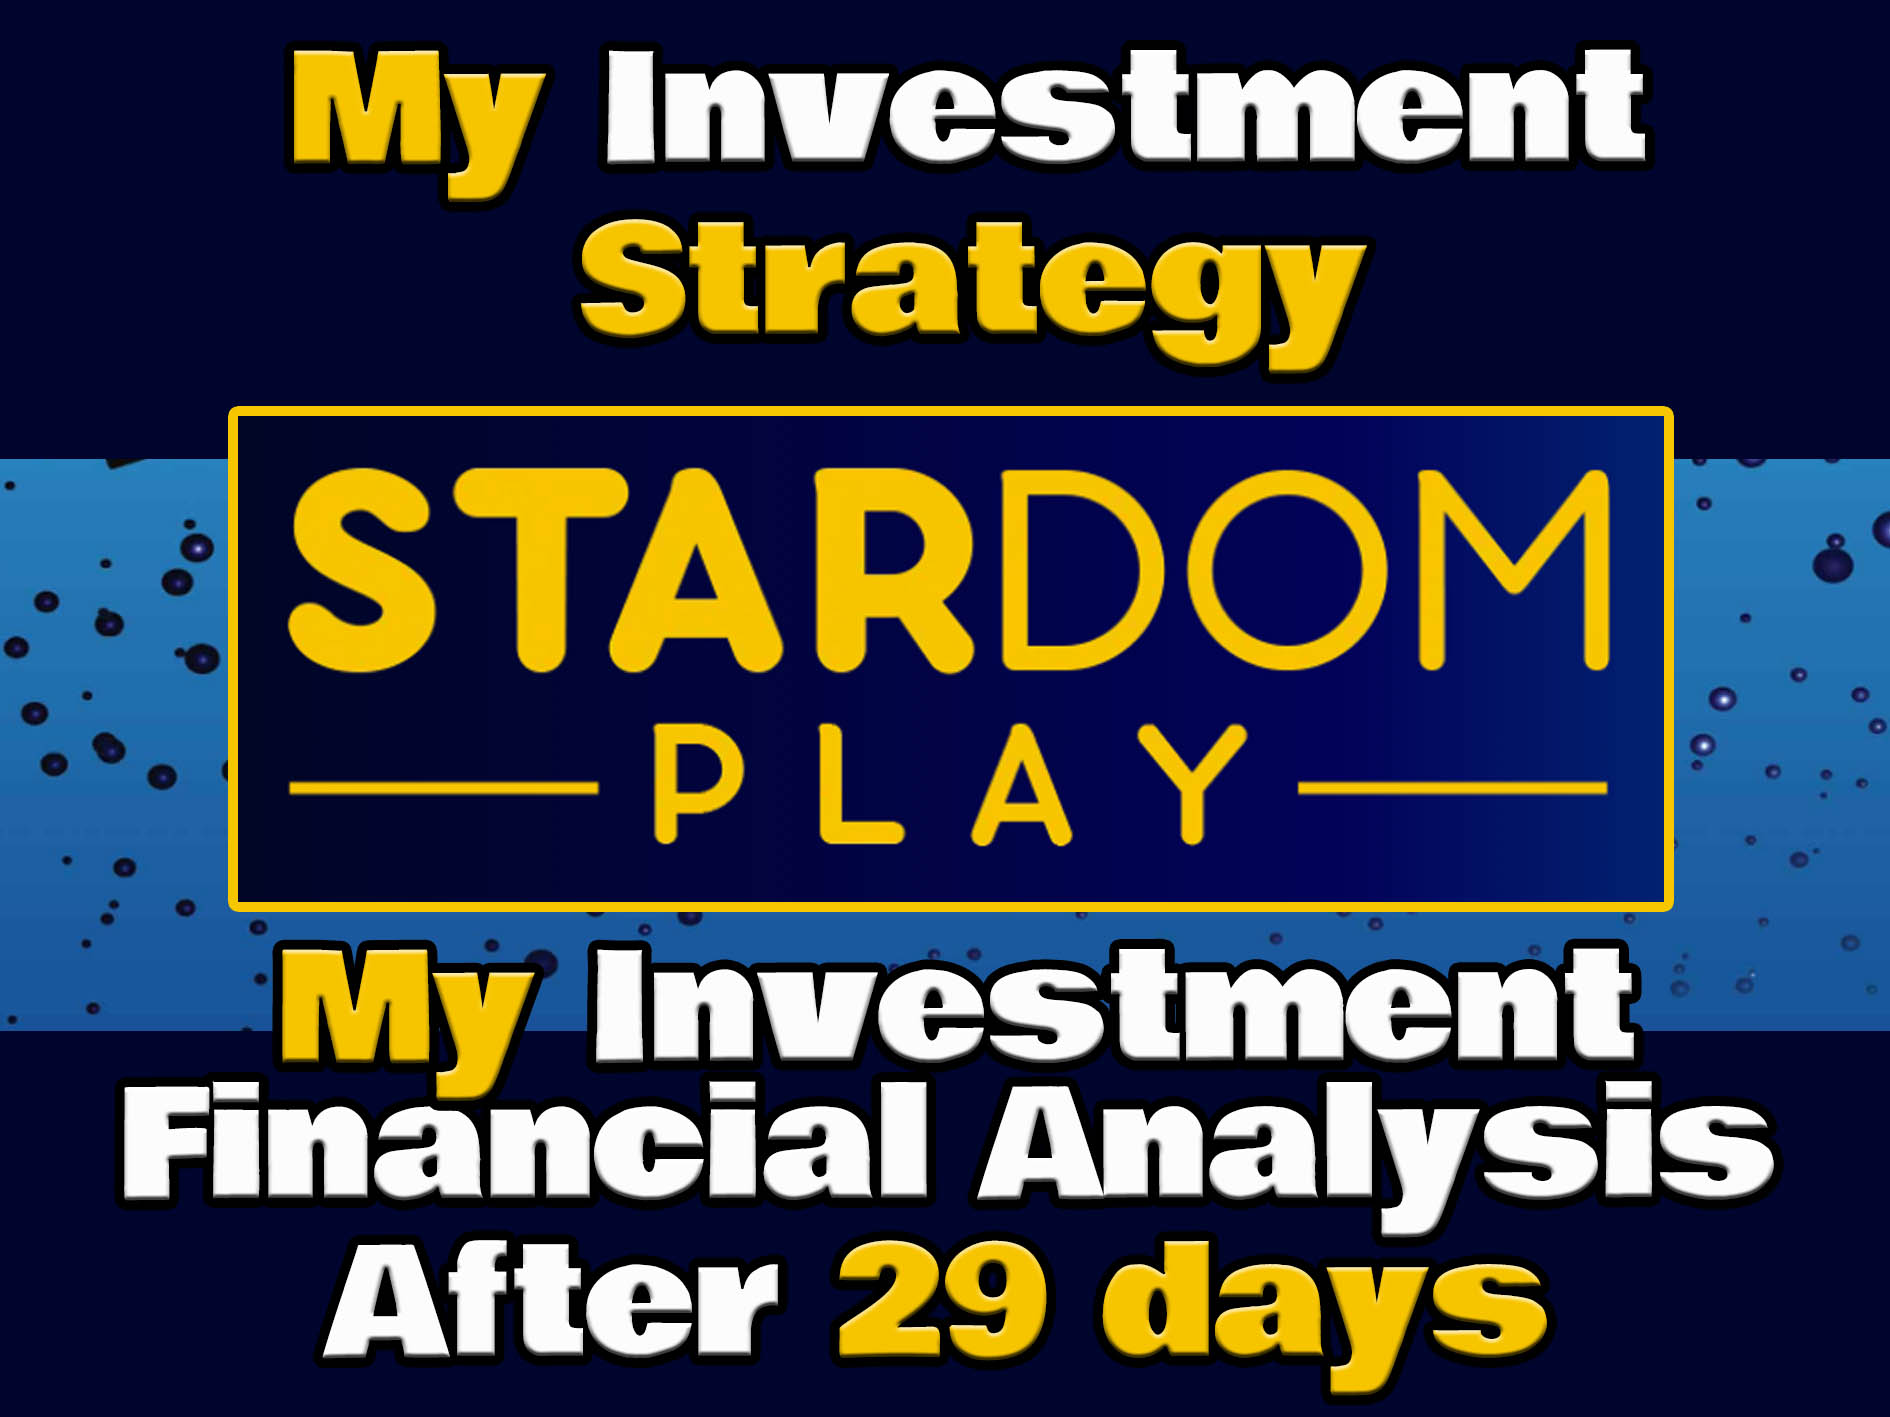 @libertycrypto27/stardom-play-my-investment-strategy-and-my-financial-investment-analysis-after-29-days-of-play-engita